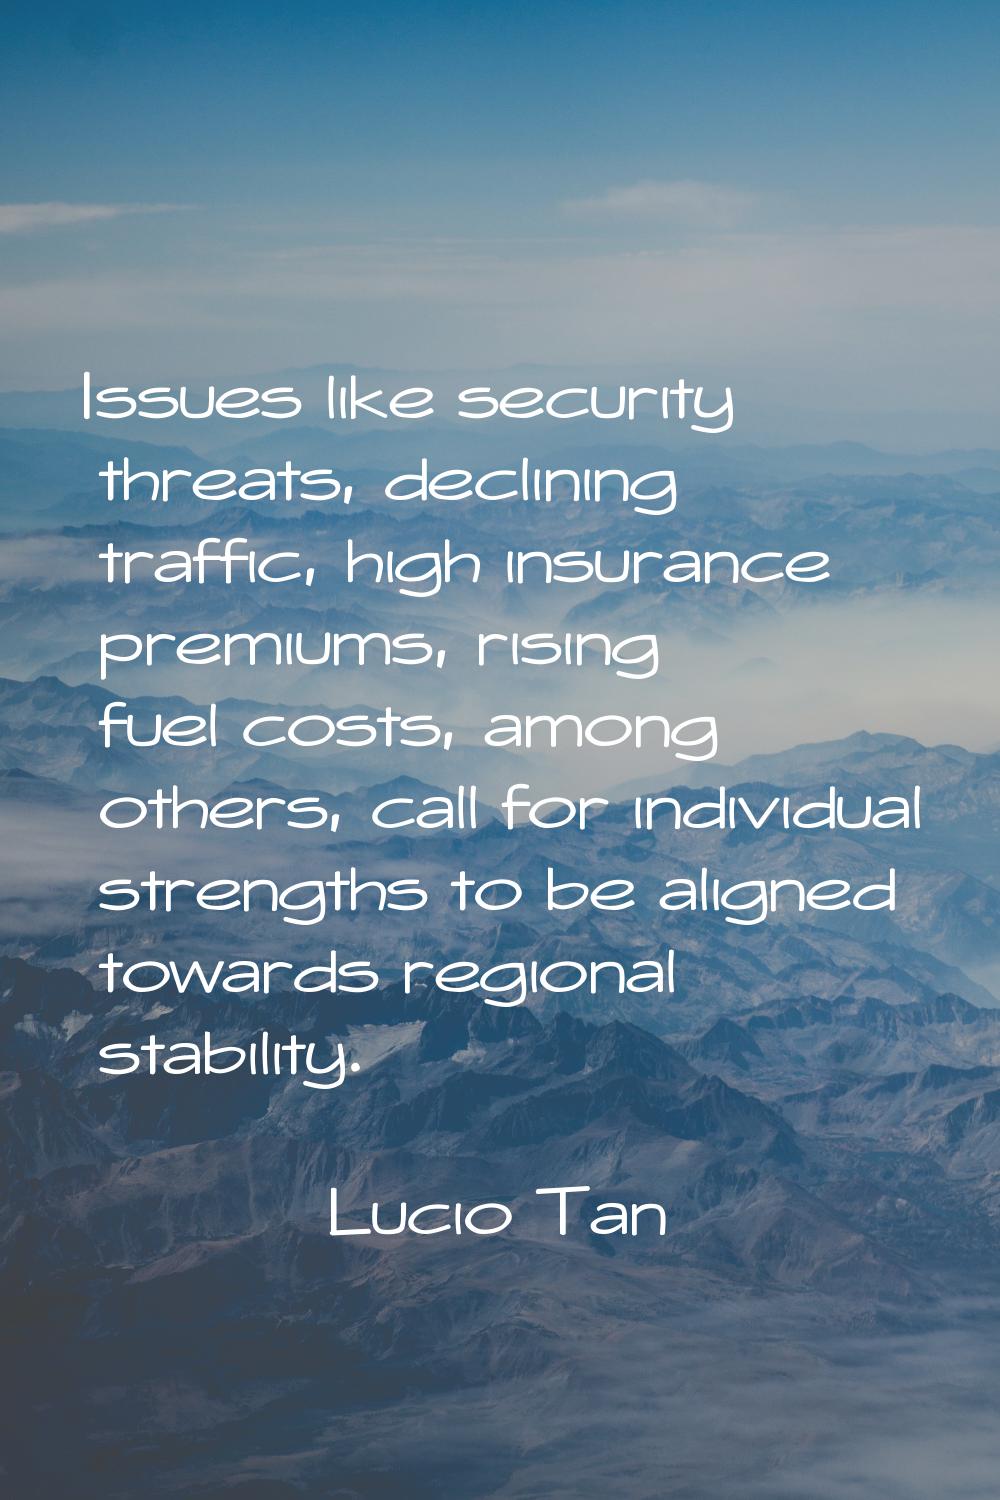 Issues like security threats, declining traffic, high insurance premiums, rising fuel costs, among 